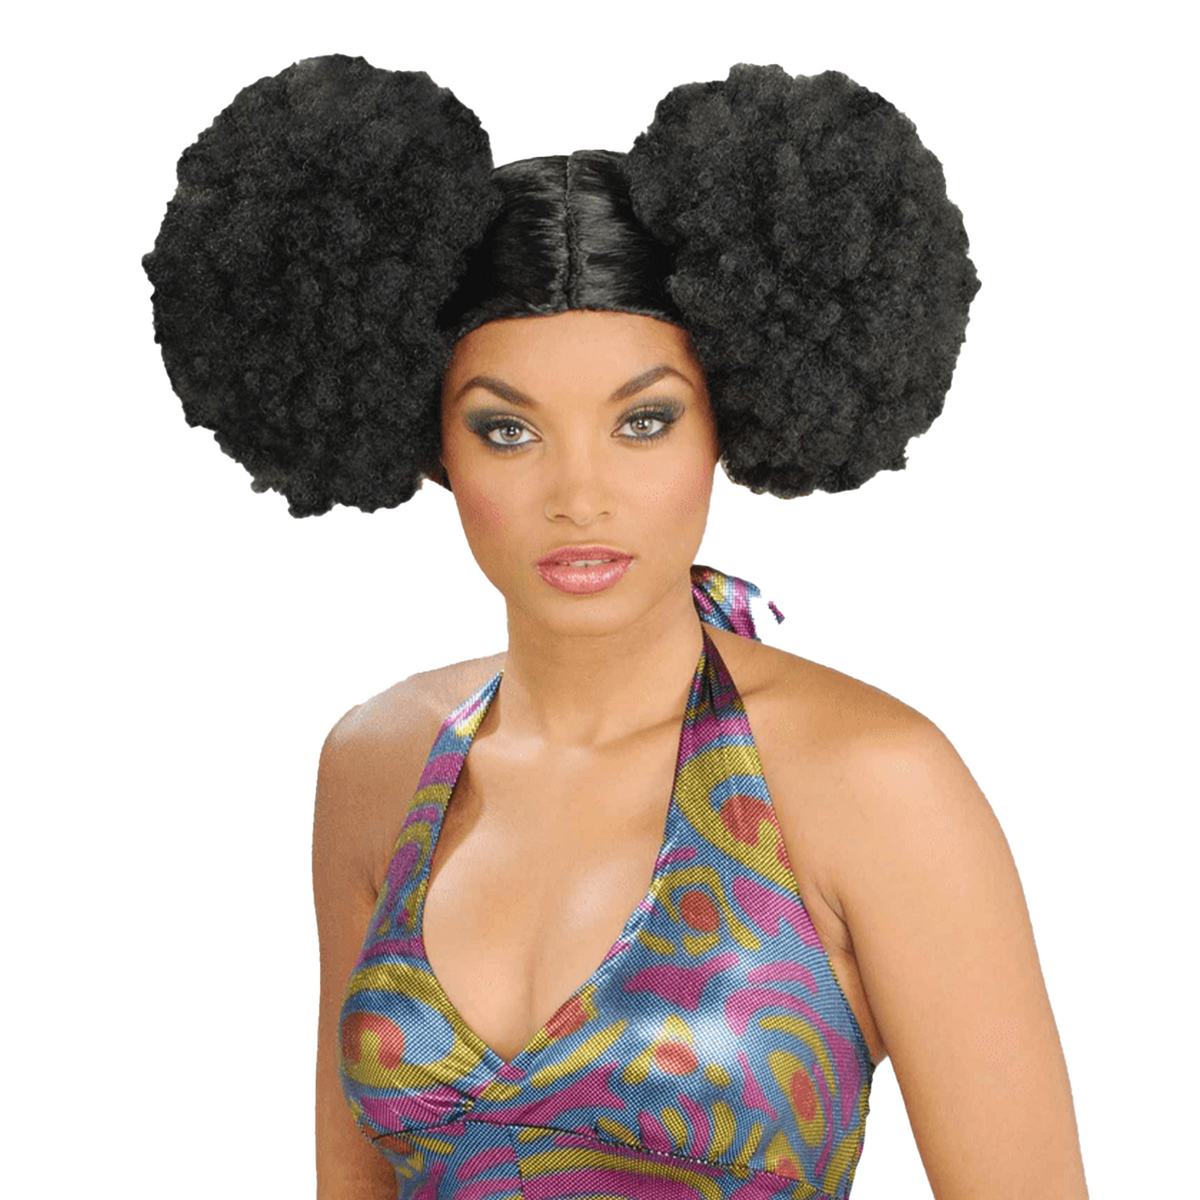 1970s Black Afro Puff Adult Wig